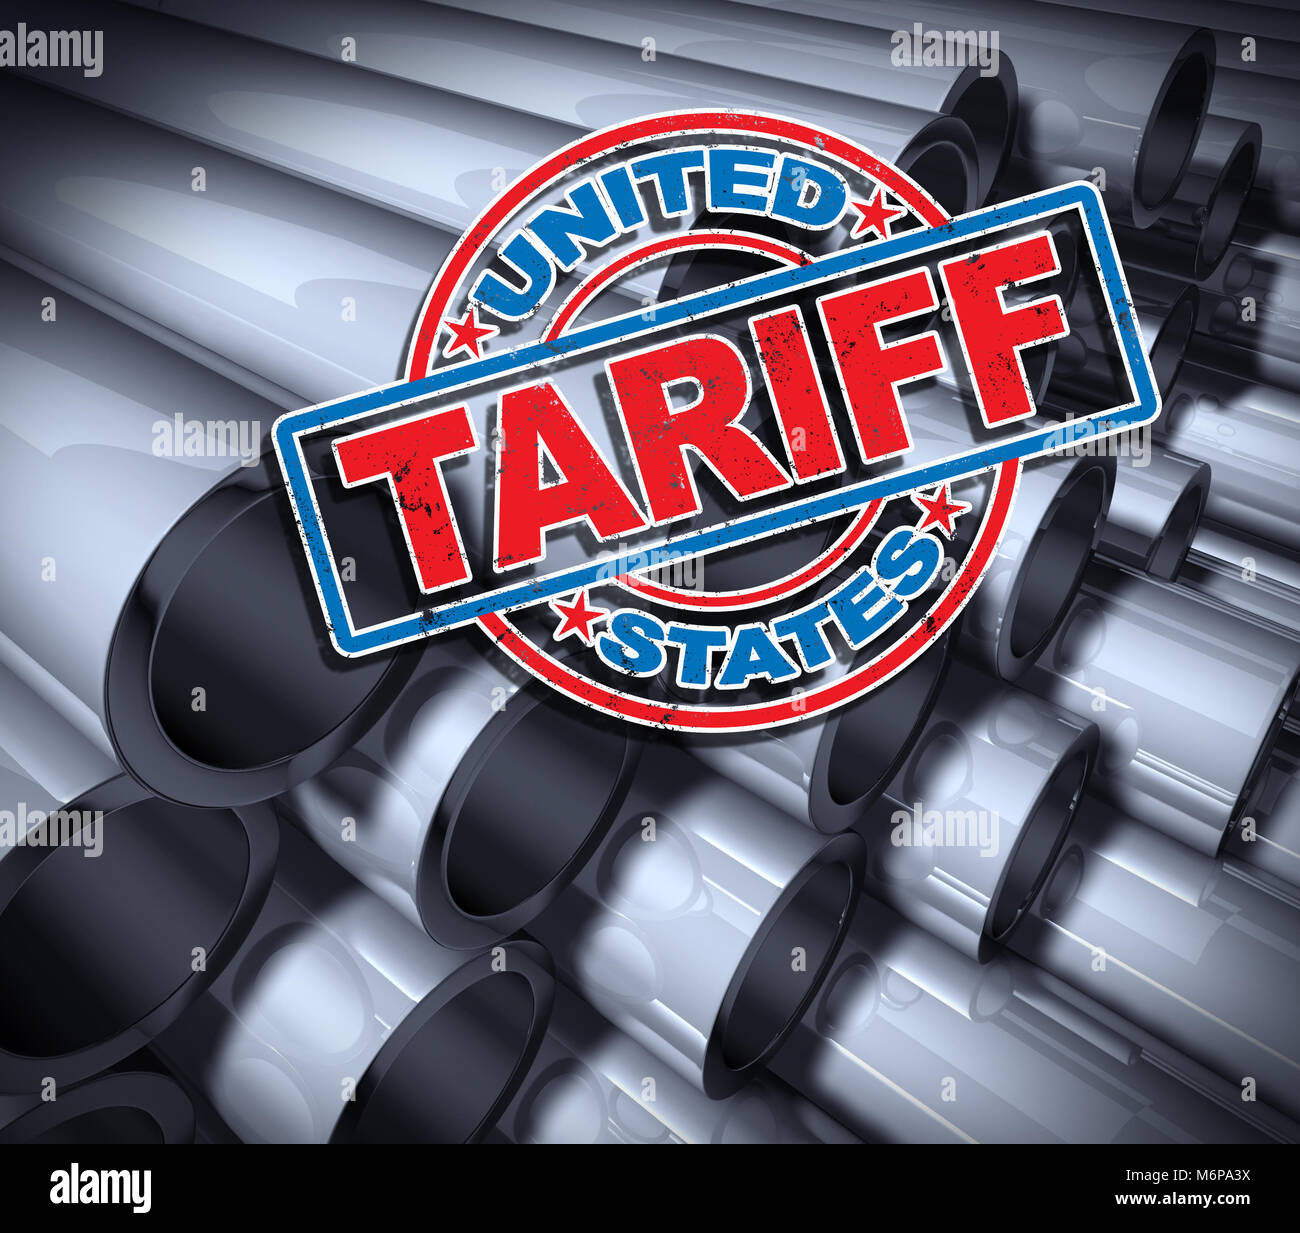 Steel and aluminum tariffs in the United states as a stamp on metal background as an economic trade taxation dispute over import. Stock Photo